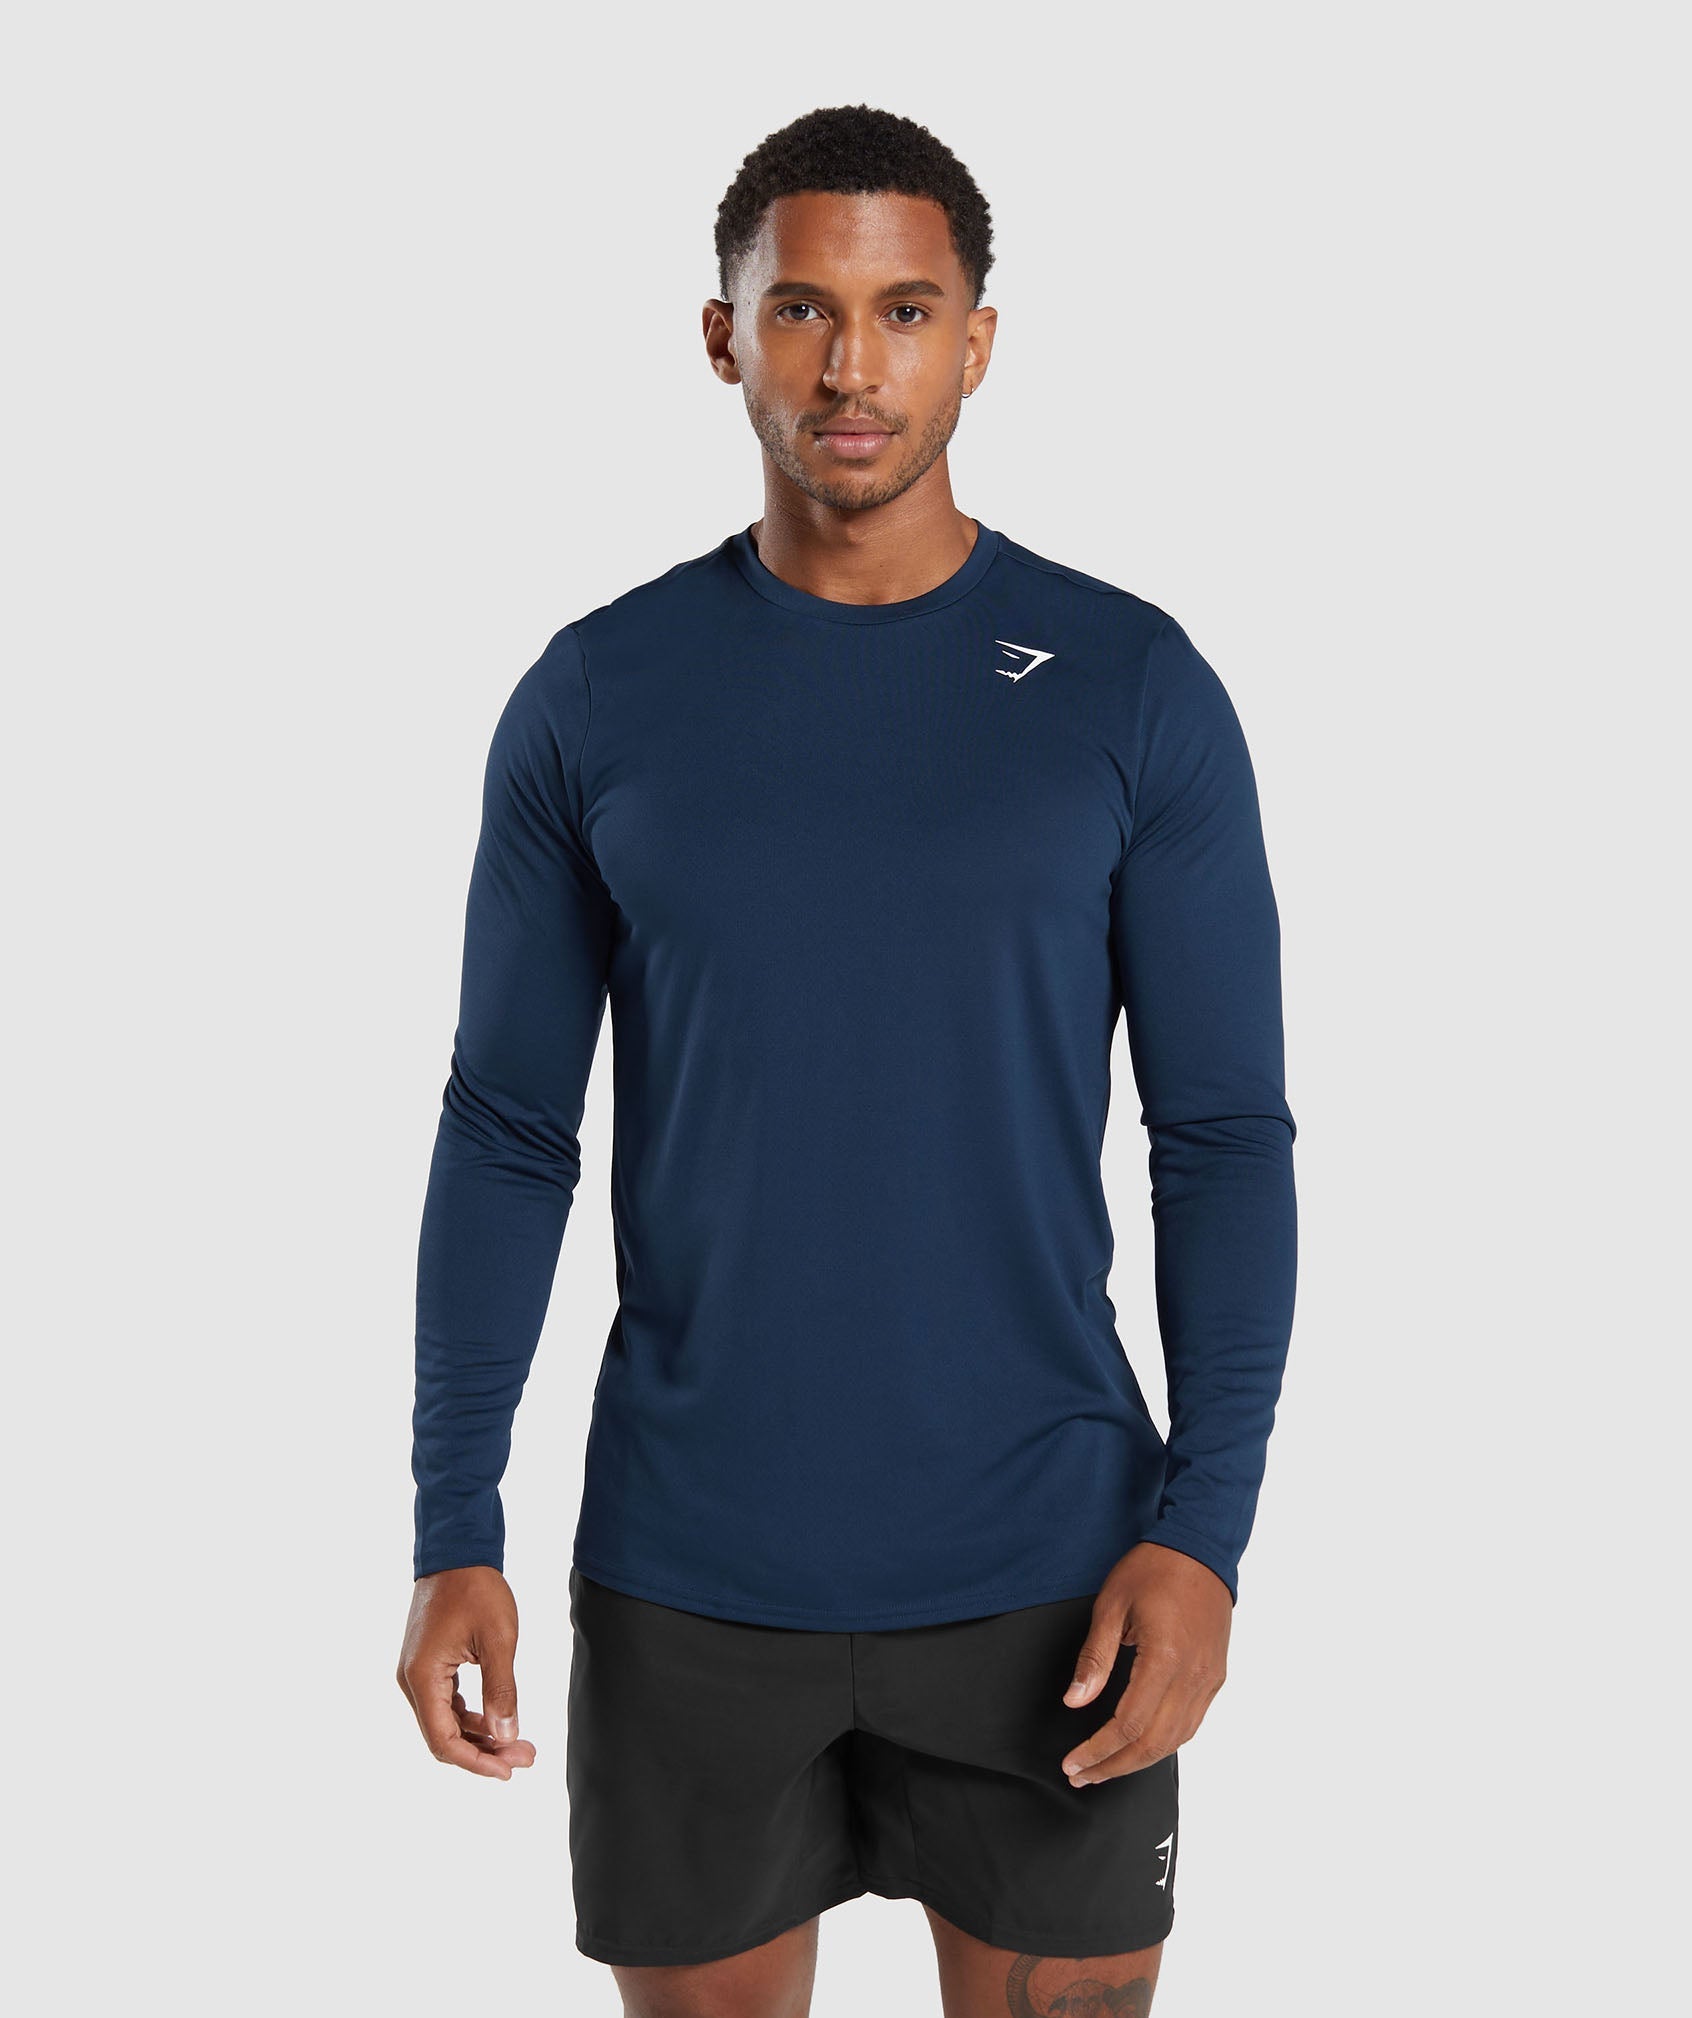 Arrival Long Sleeve T-Shirt in Navy - view 1